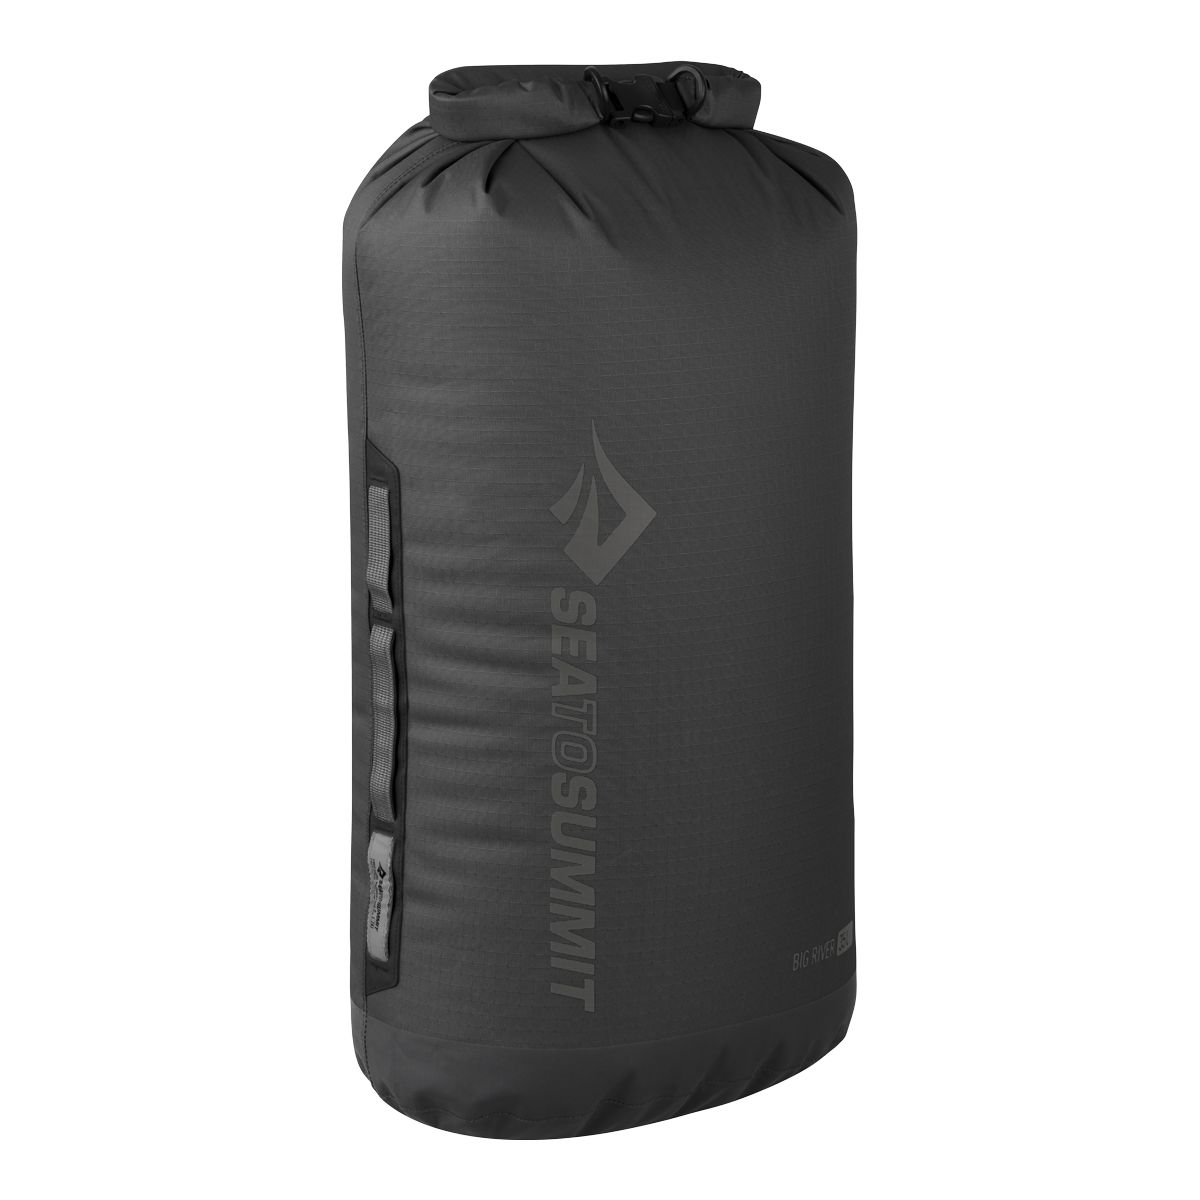 Sea to Summit Big River 35L Extra Large Dry Bag | Atmosphere